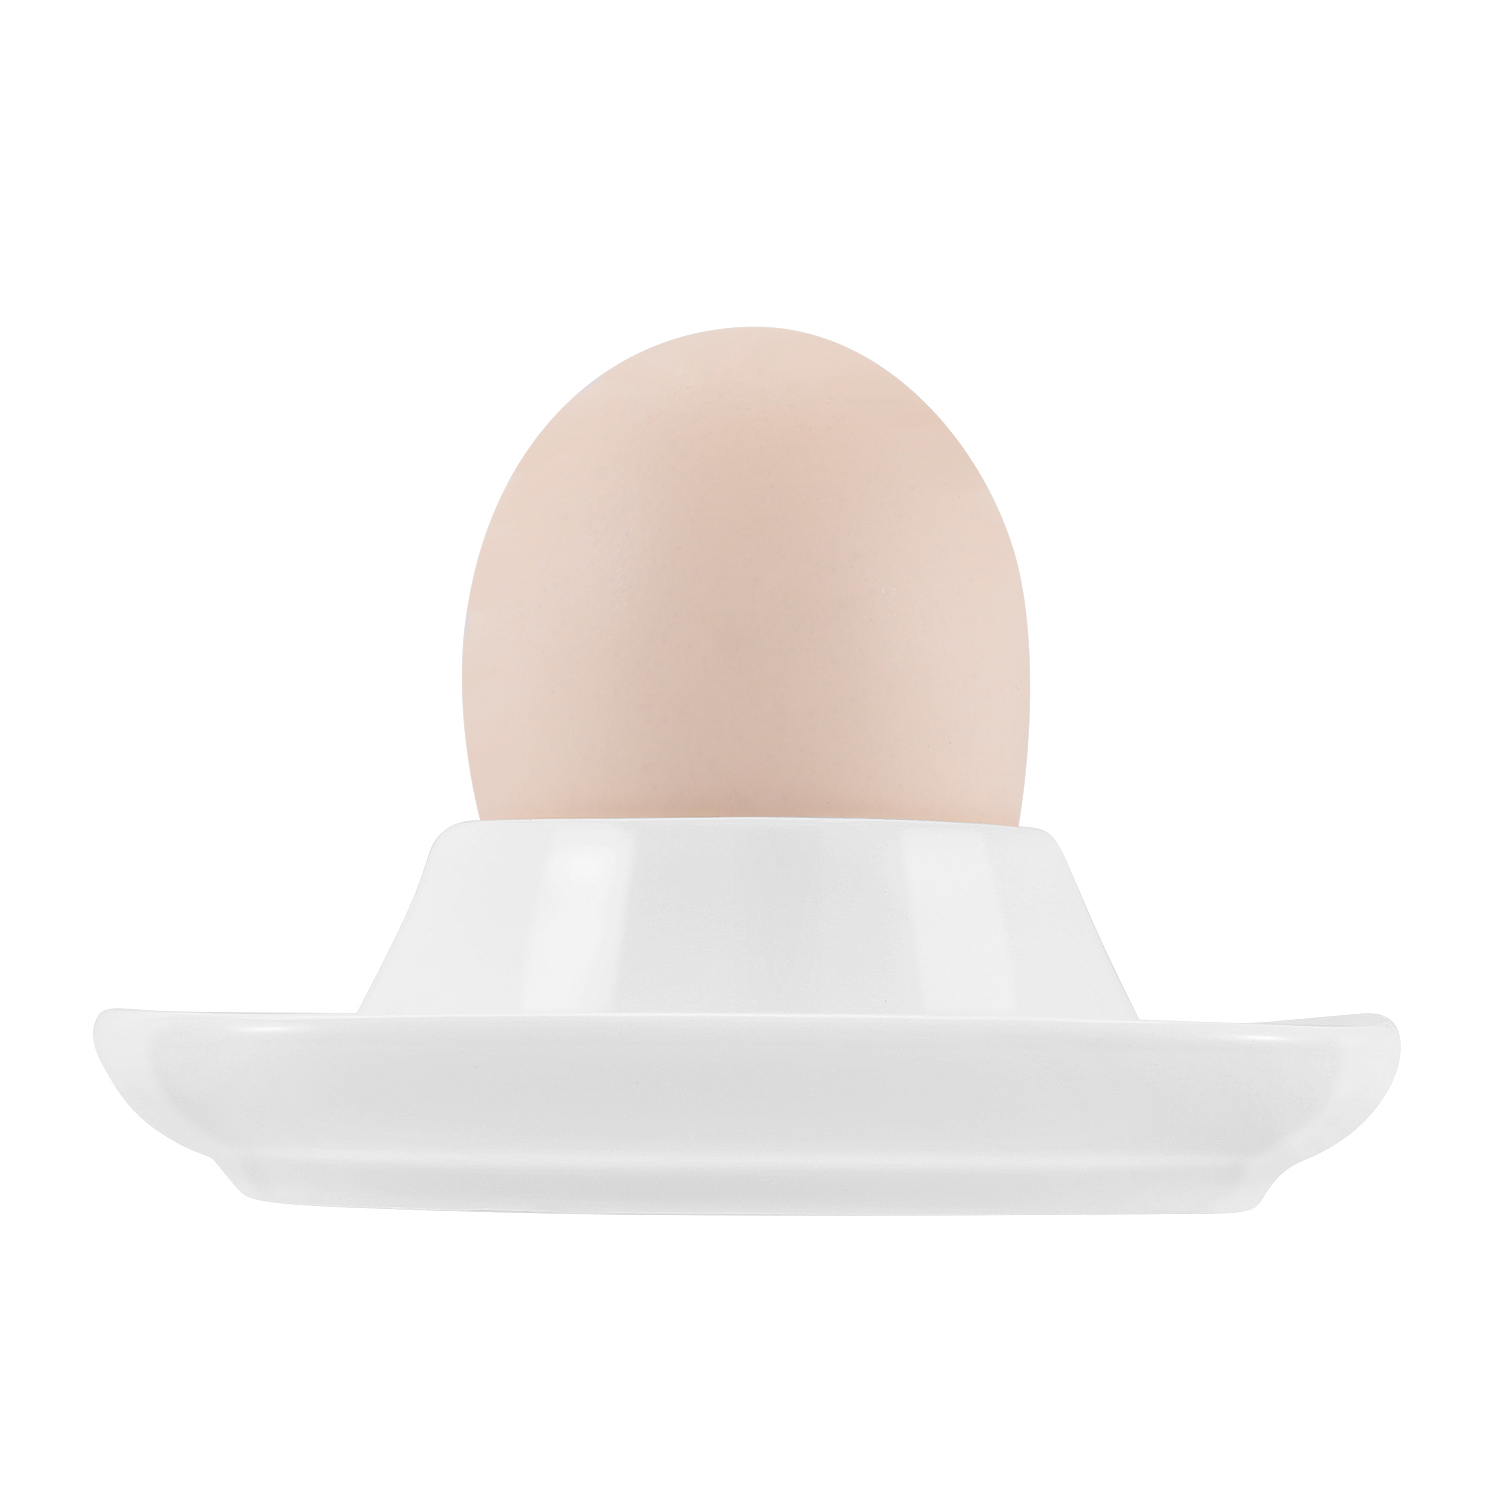 Perfect for serving soft and hard-boiled eggs but can also be used as an elegant saucer dip dish. The egg cups are able to support most eggs sizes upright. Not just for home dining but also restaurants, tea parties, and other special occasions